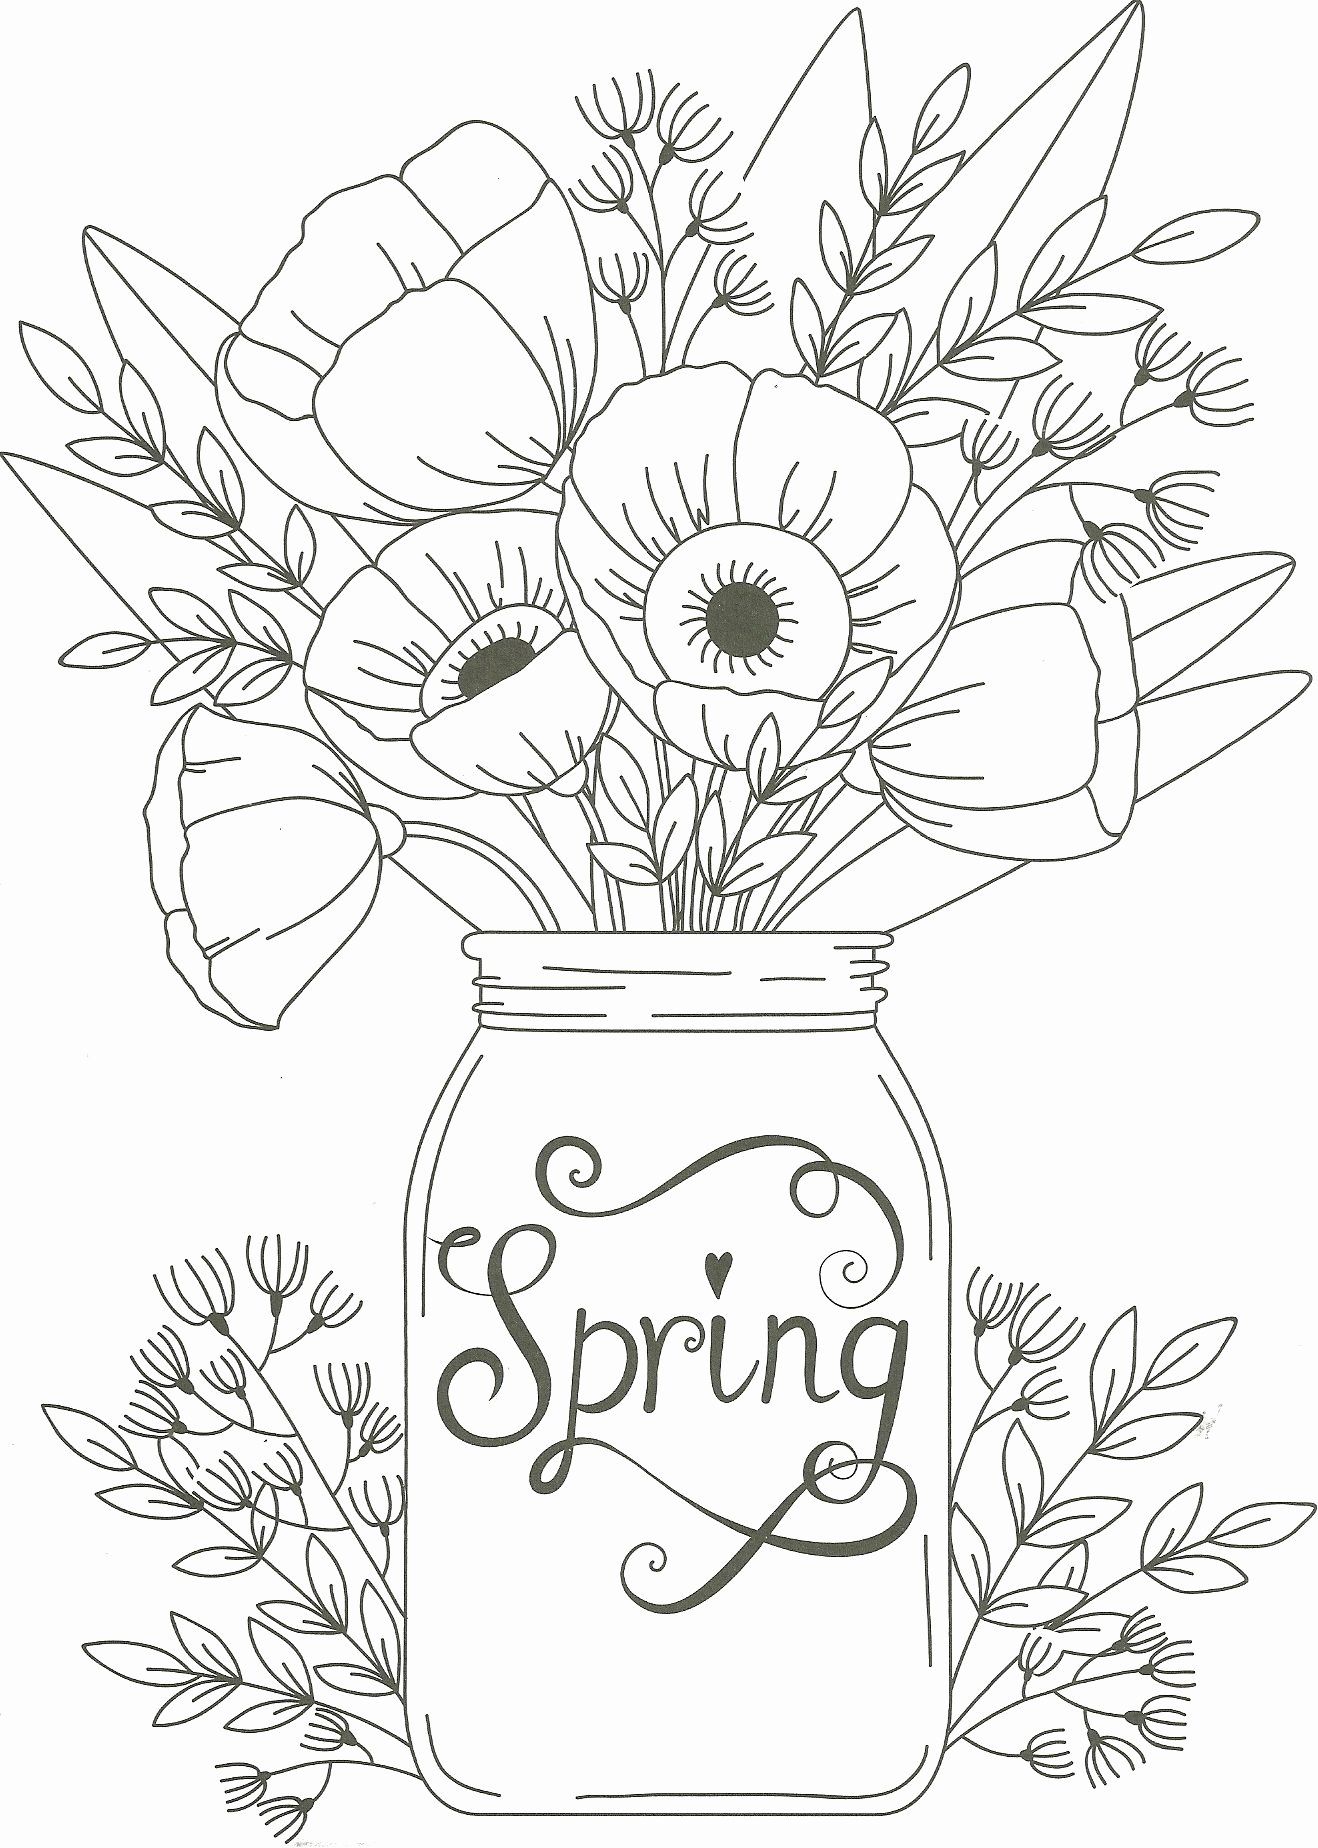 Spring Coloring Sheets for Adults in 2020 | Spring coloring pages ...